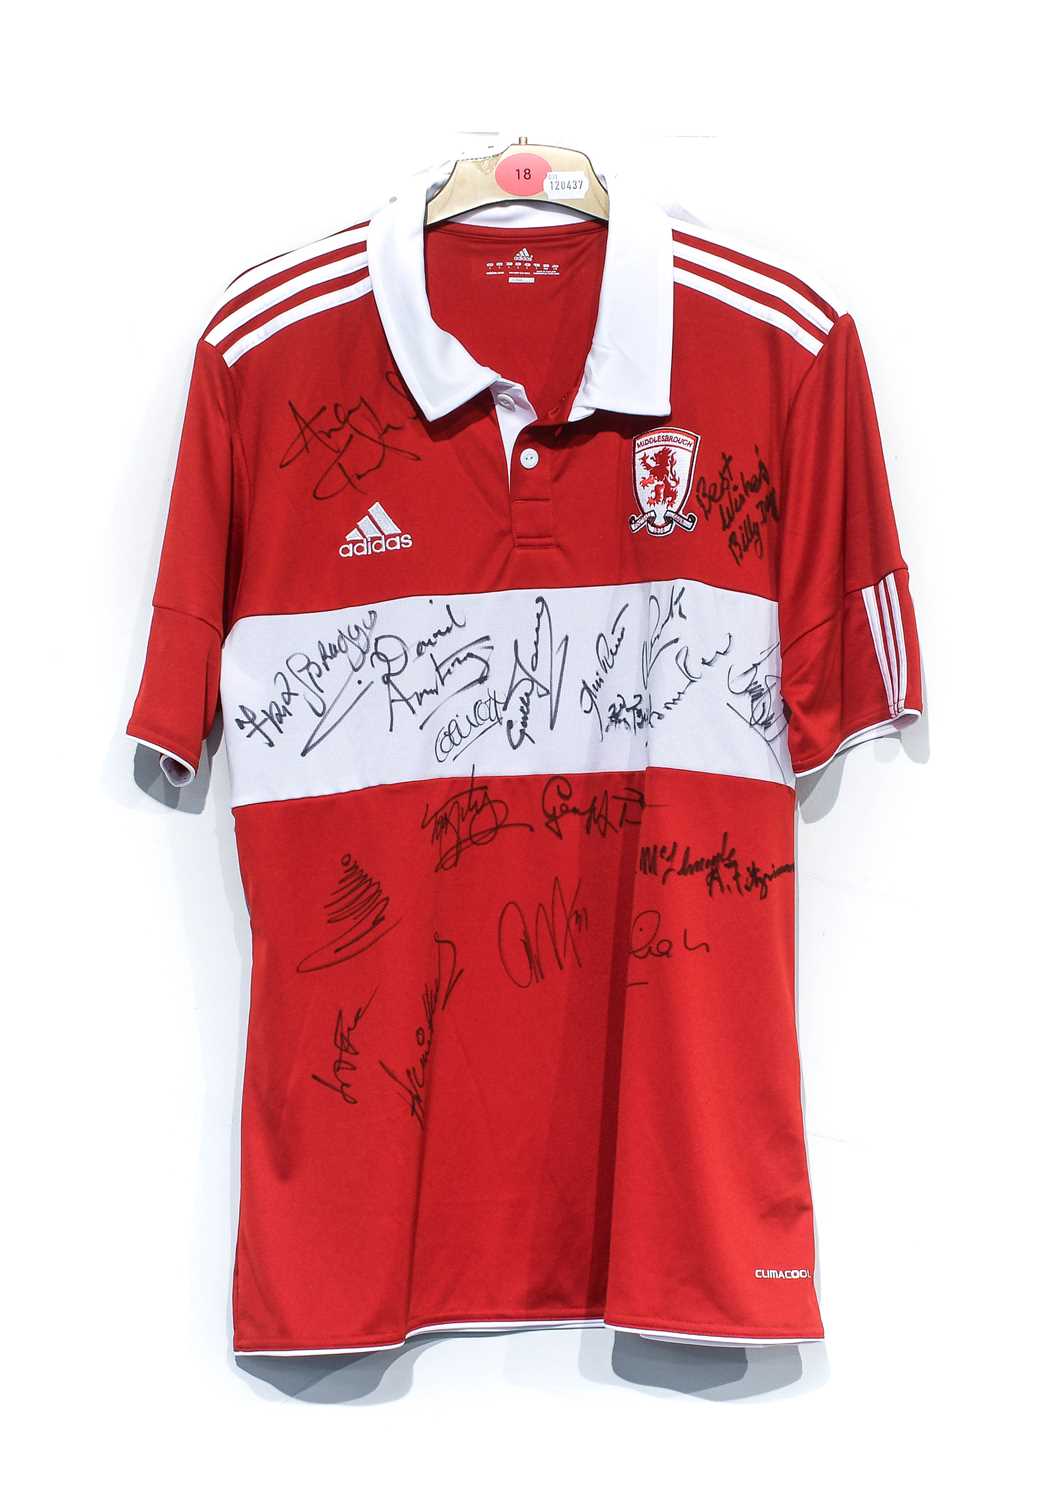 Middlesbrough Three Signed Football Shirts - Image 2 of 7